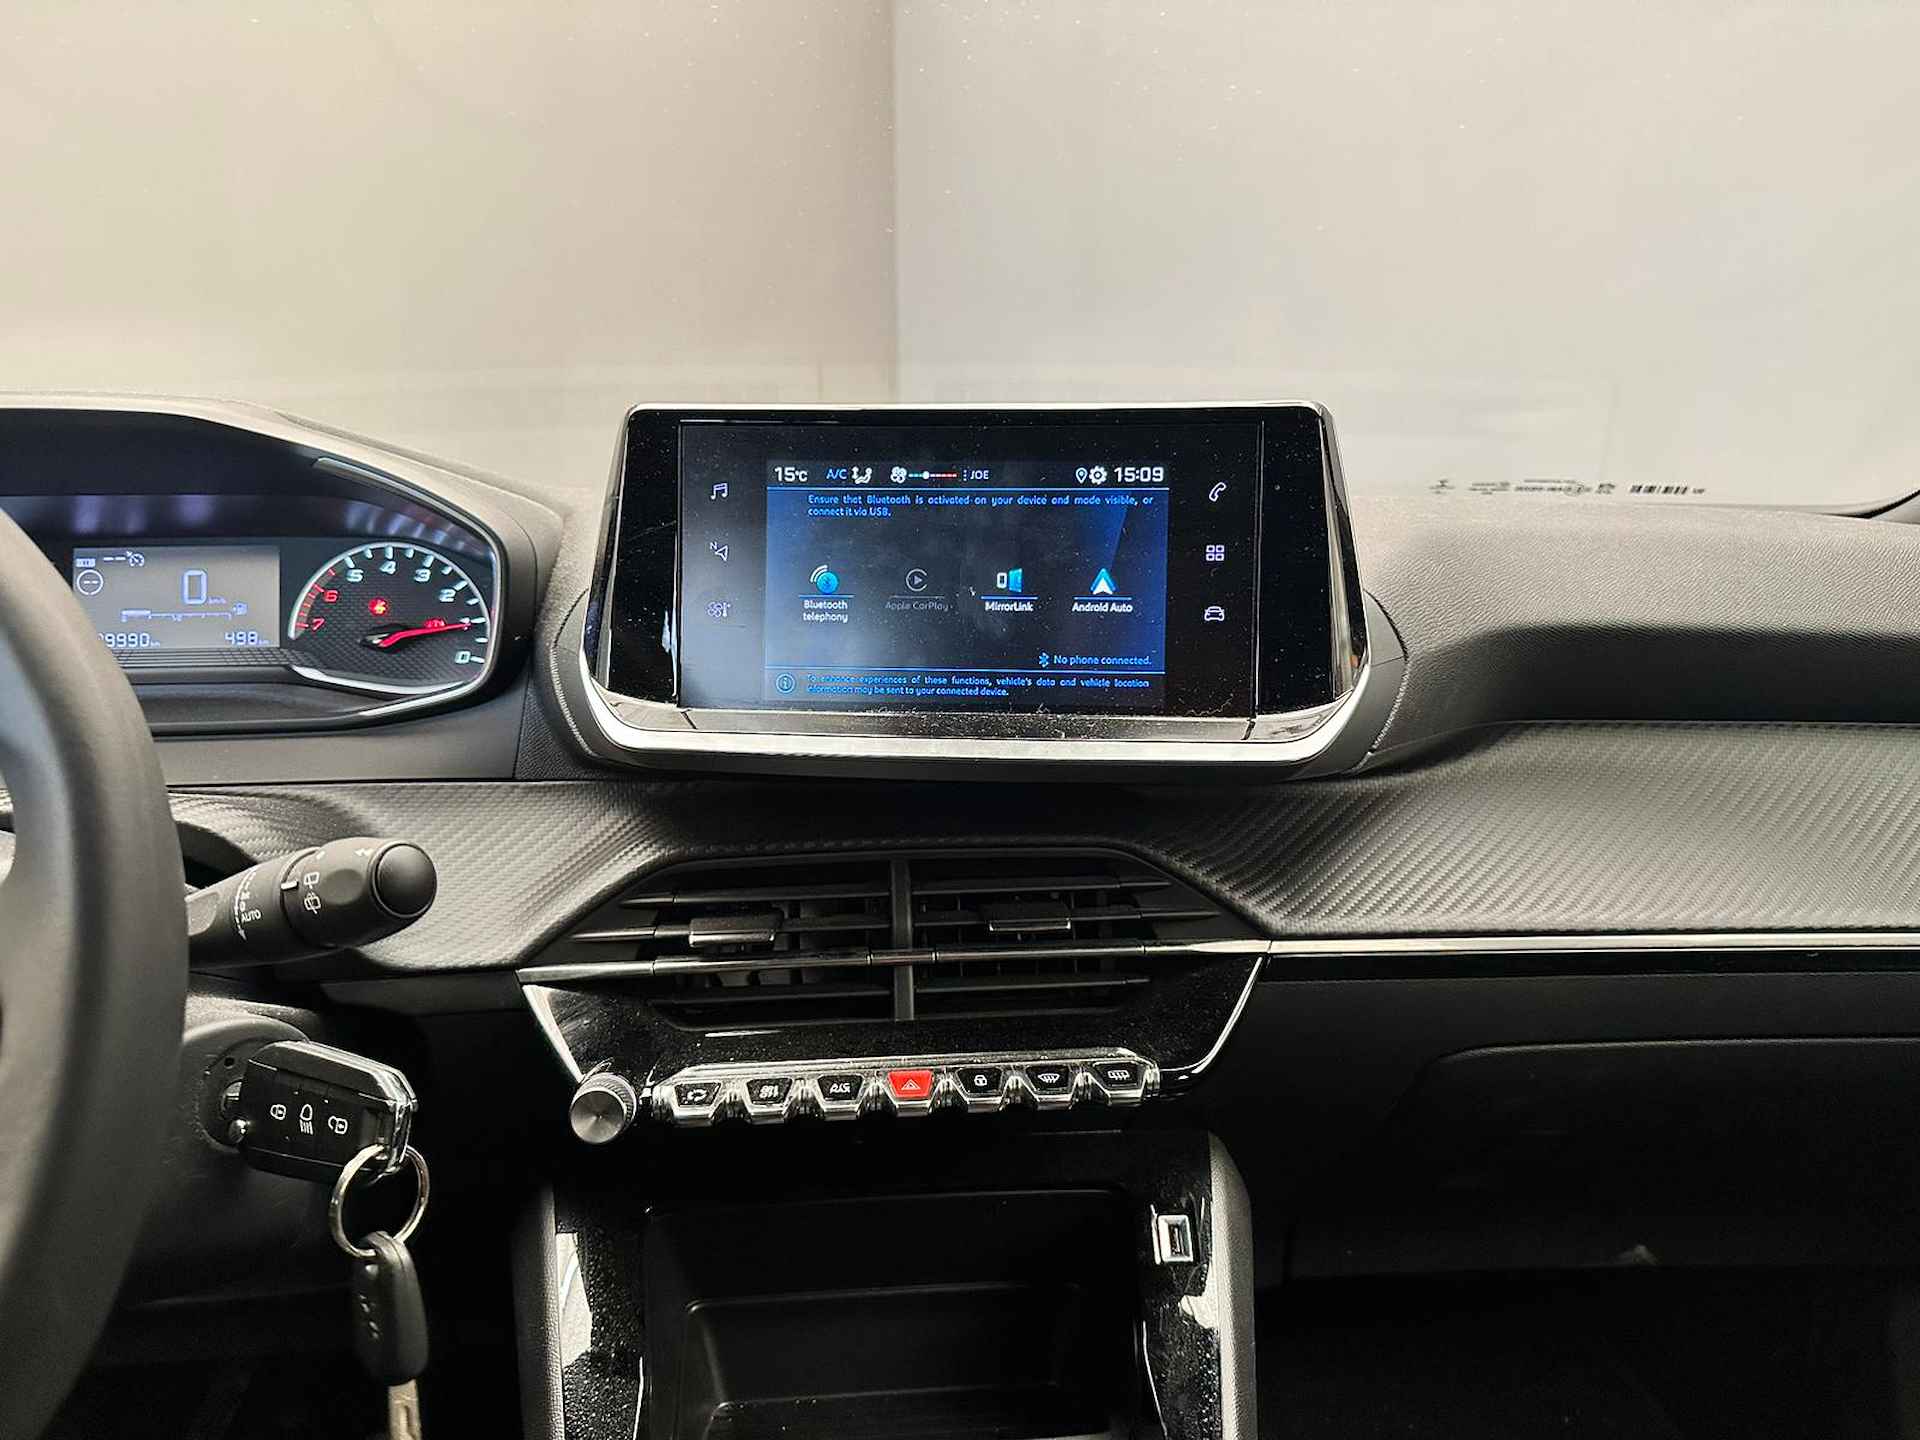 Peugeot 2008 1.2 100PK Active | Parkeersensoren Achter | Apple/Android Carplay | Airco | Cruise | LED | DAB | Bluetooth | Centrale Vergrendeling - 20/23